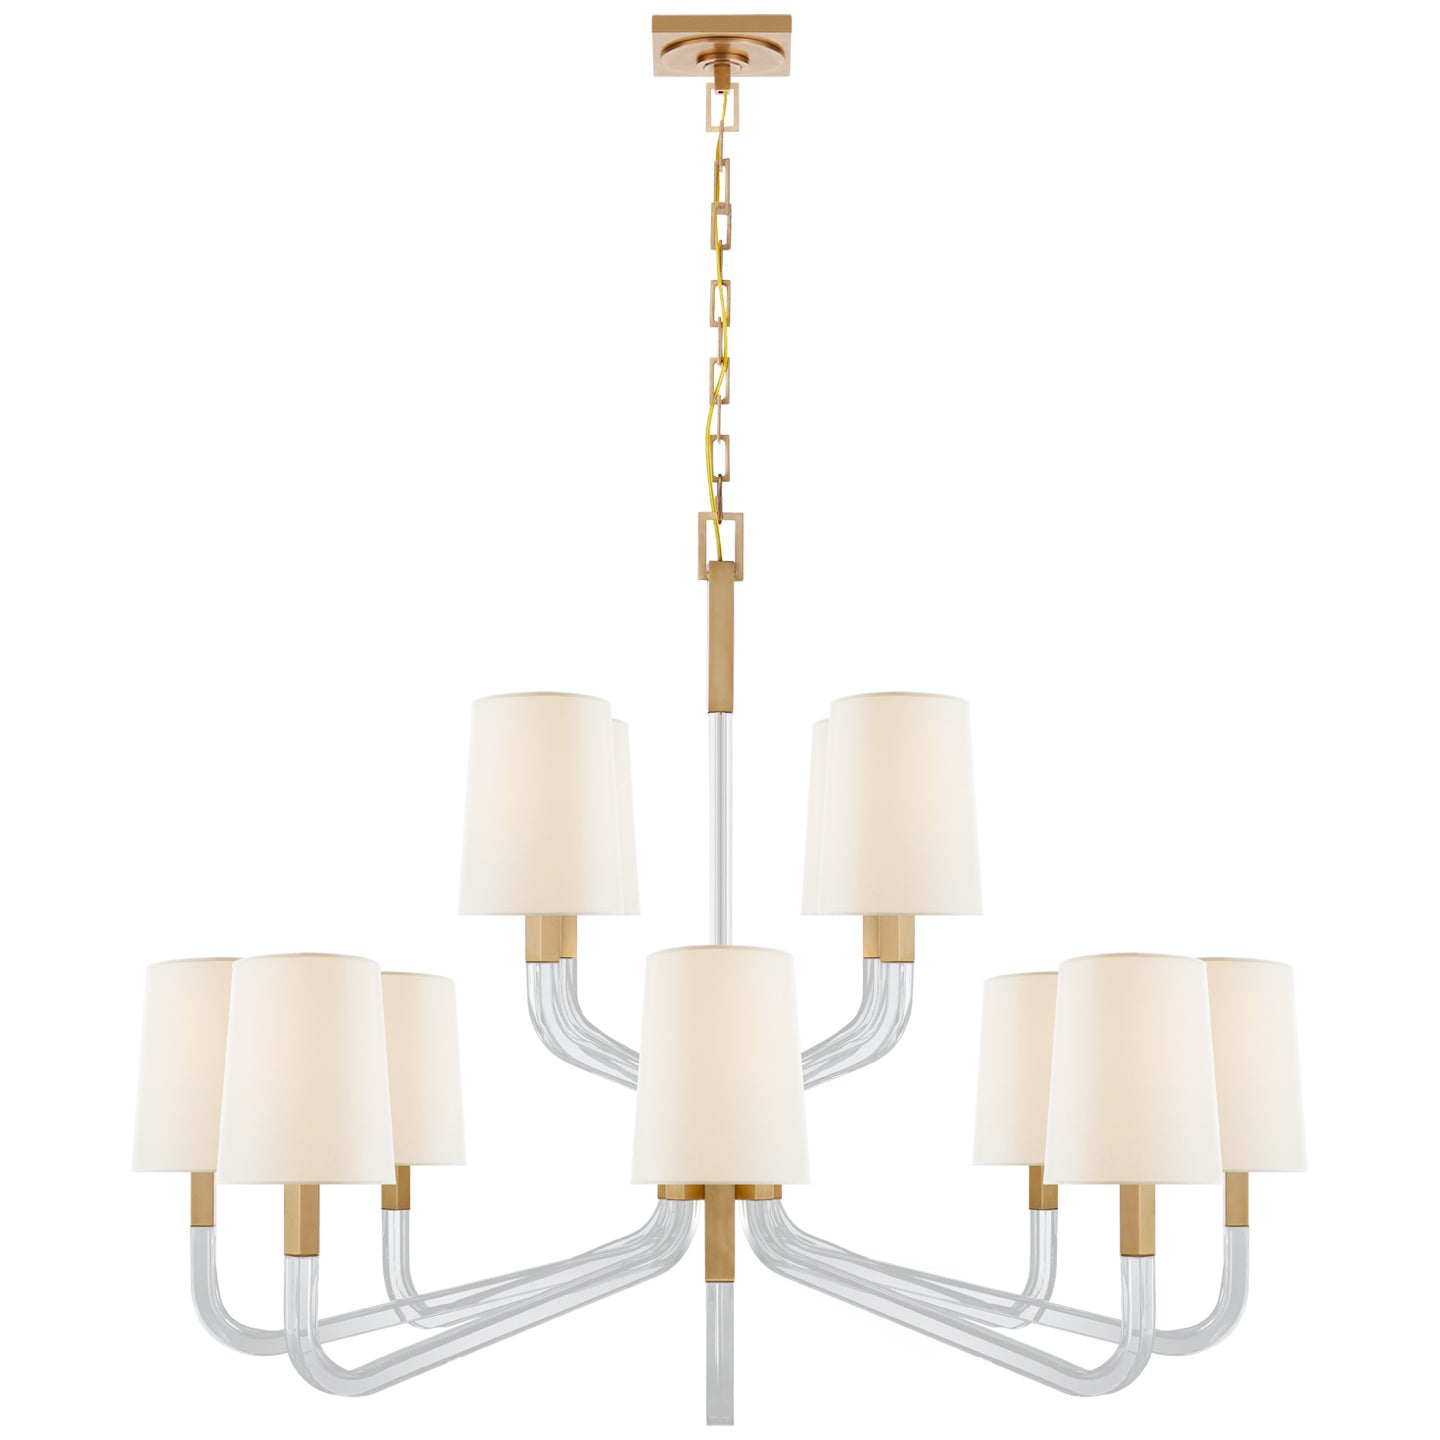 Load image into Gallery viewer, Visual Comfort Signature - CHC 5904AB/CG-L - 12 Light Chandelier - Reagan - Antique-Burnished Brass and Crystal
